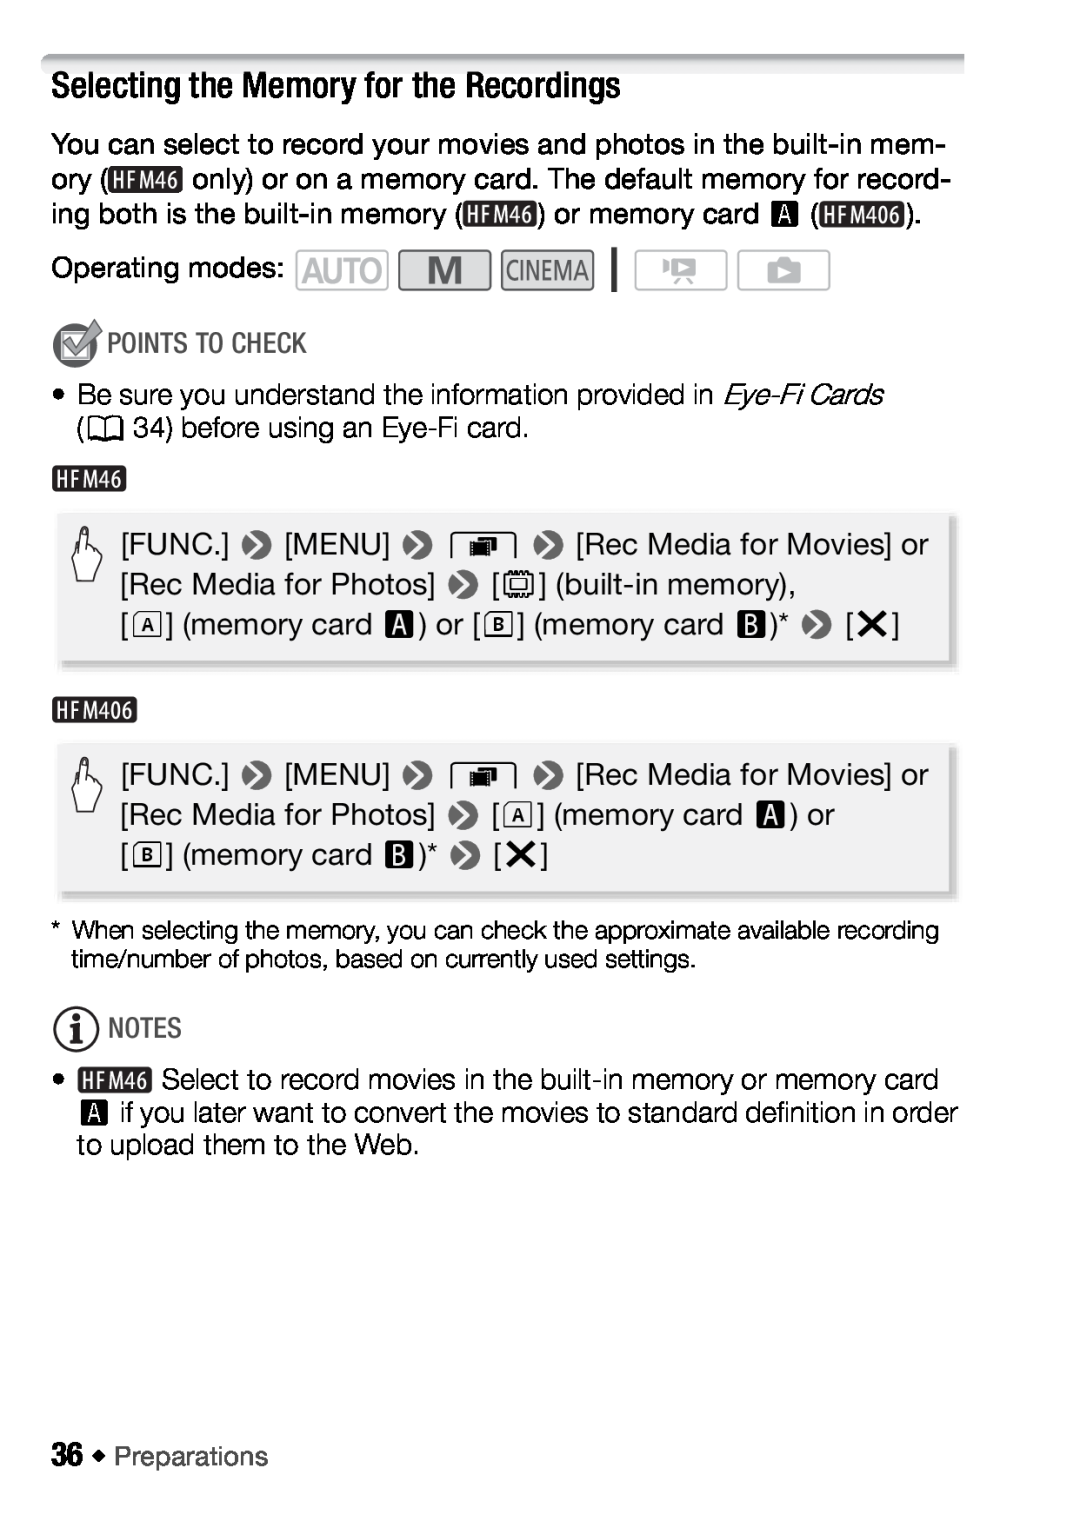 Canon HFM406, HFM46 instruction manual Selecting the Memory for the Recordings, Points To Check 